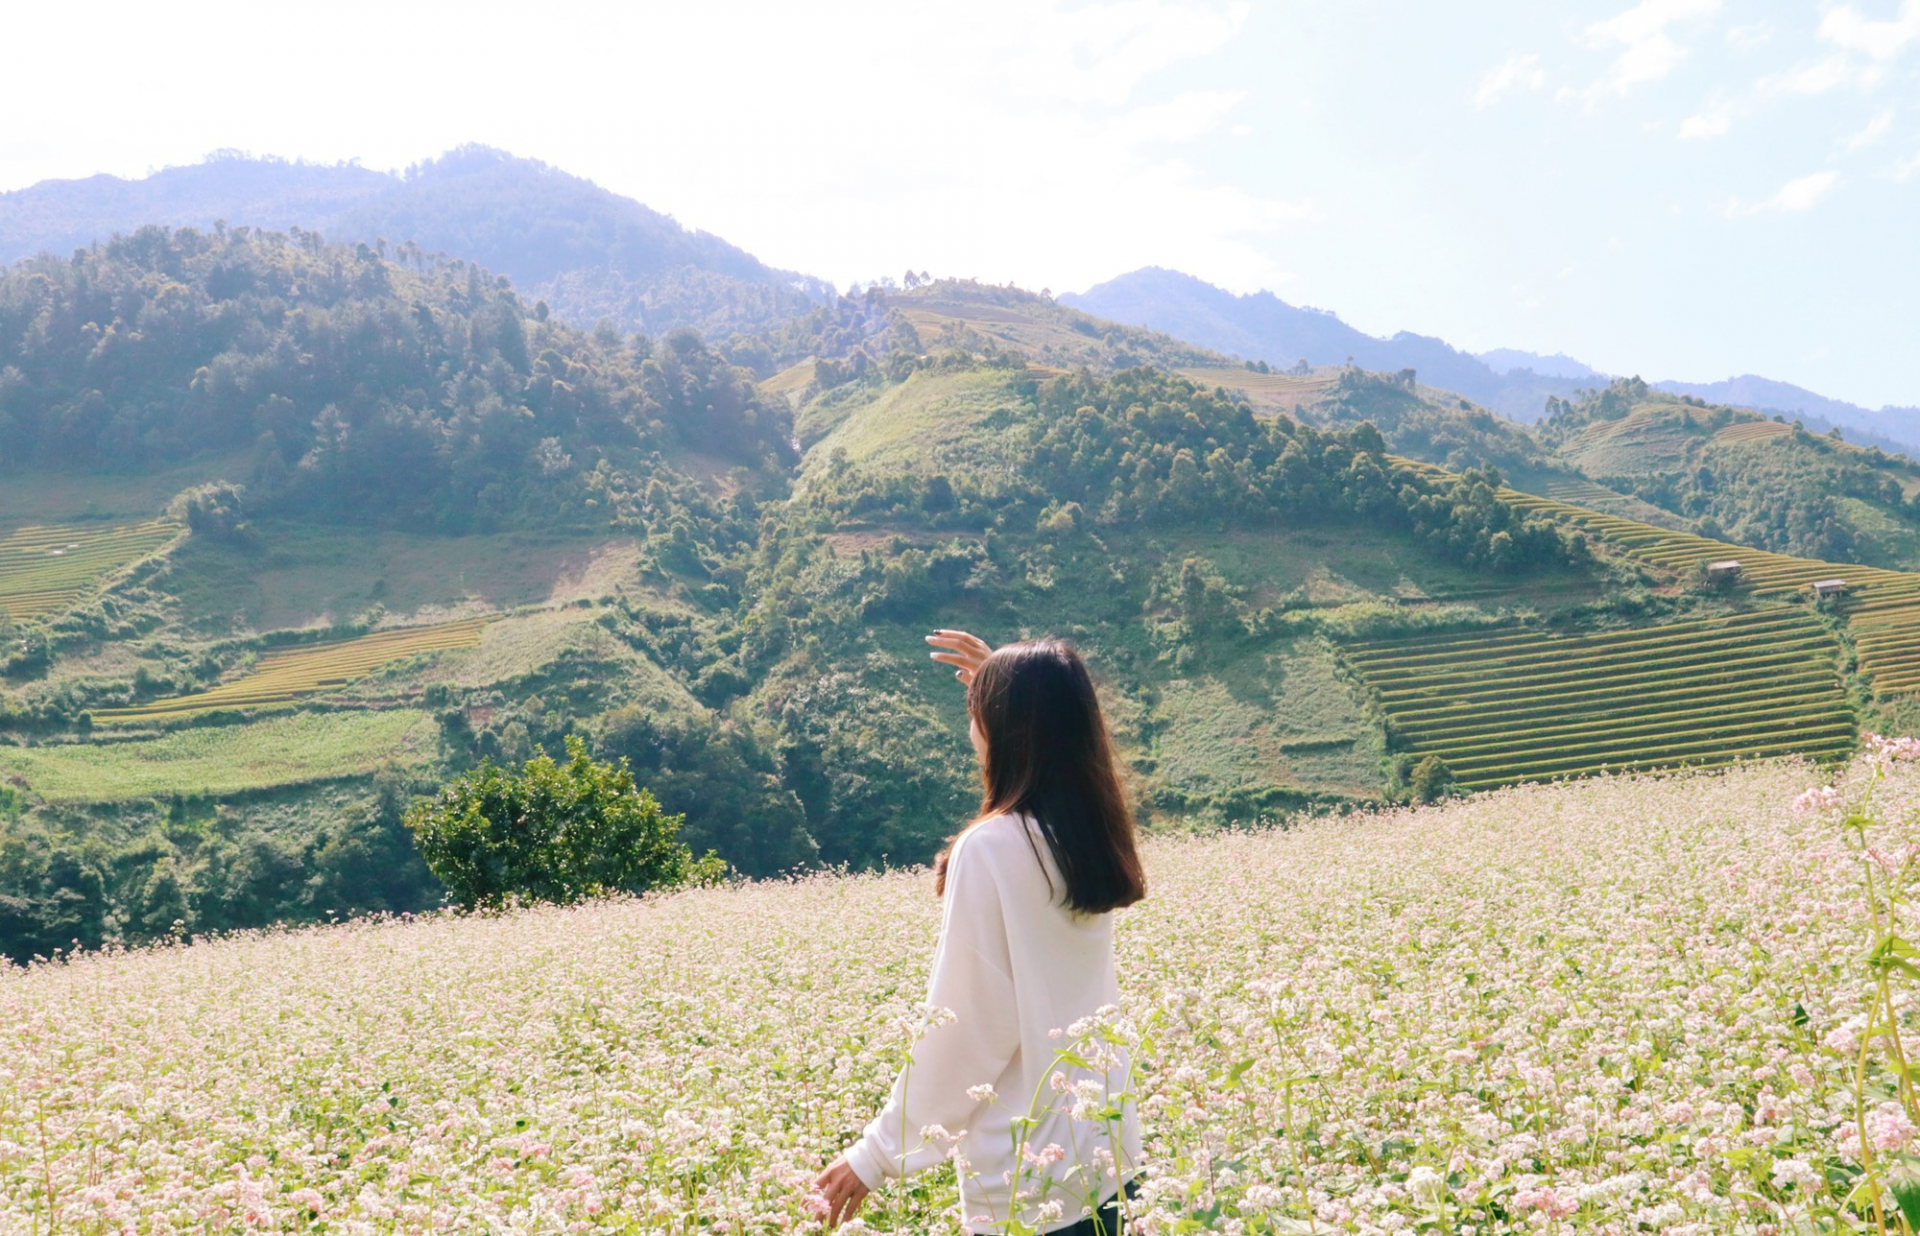 Ideal places to admire buckwheat flowers in northern Vietnam